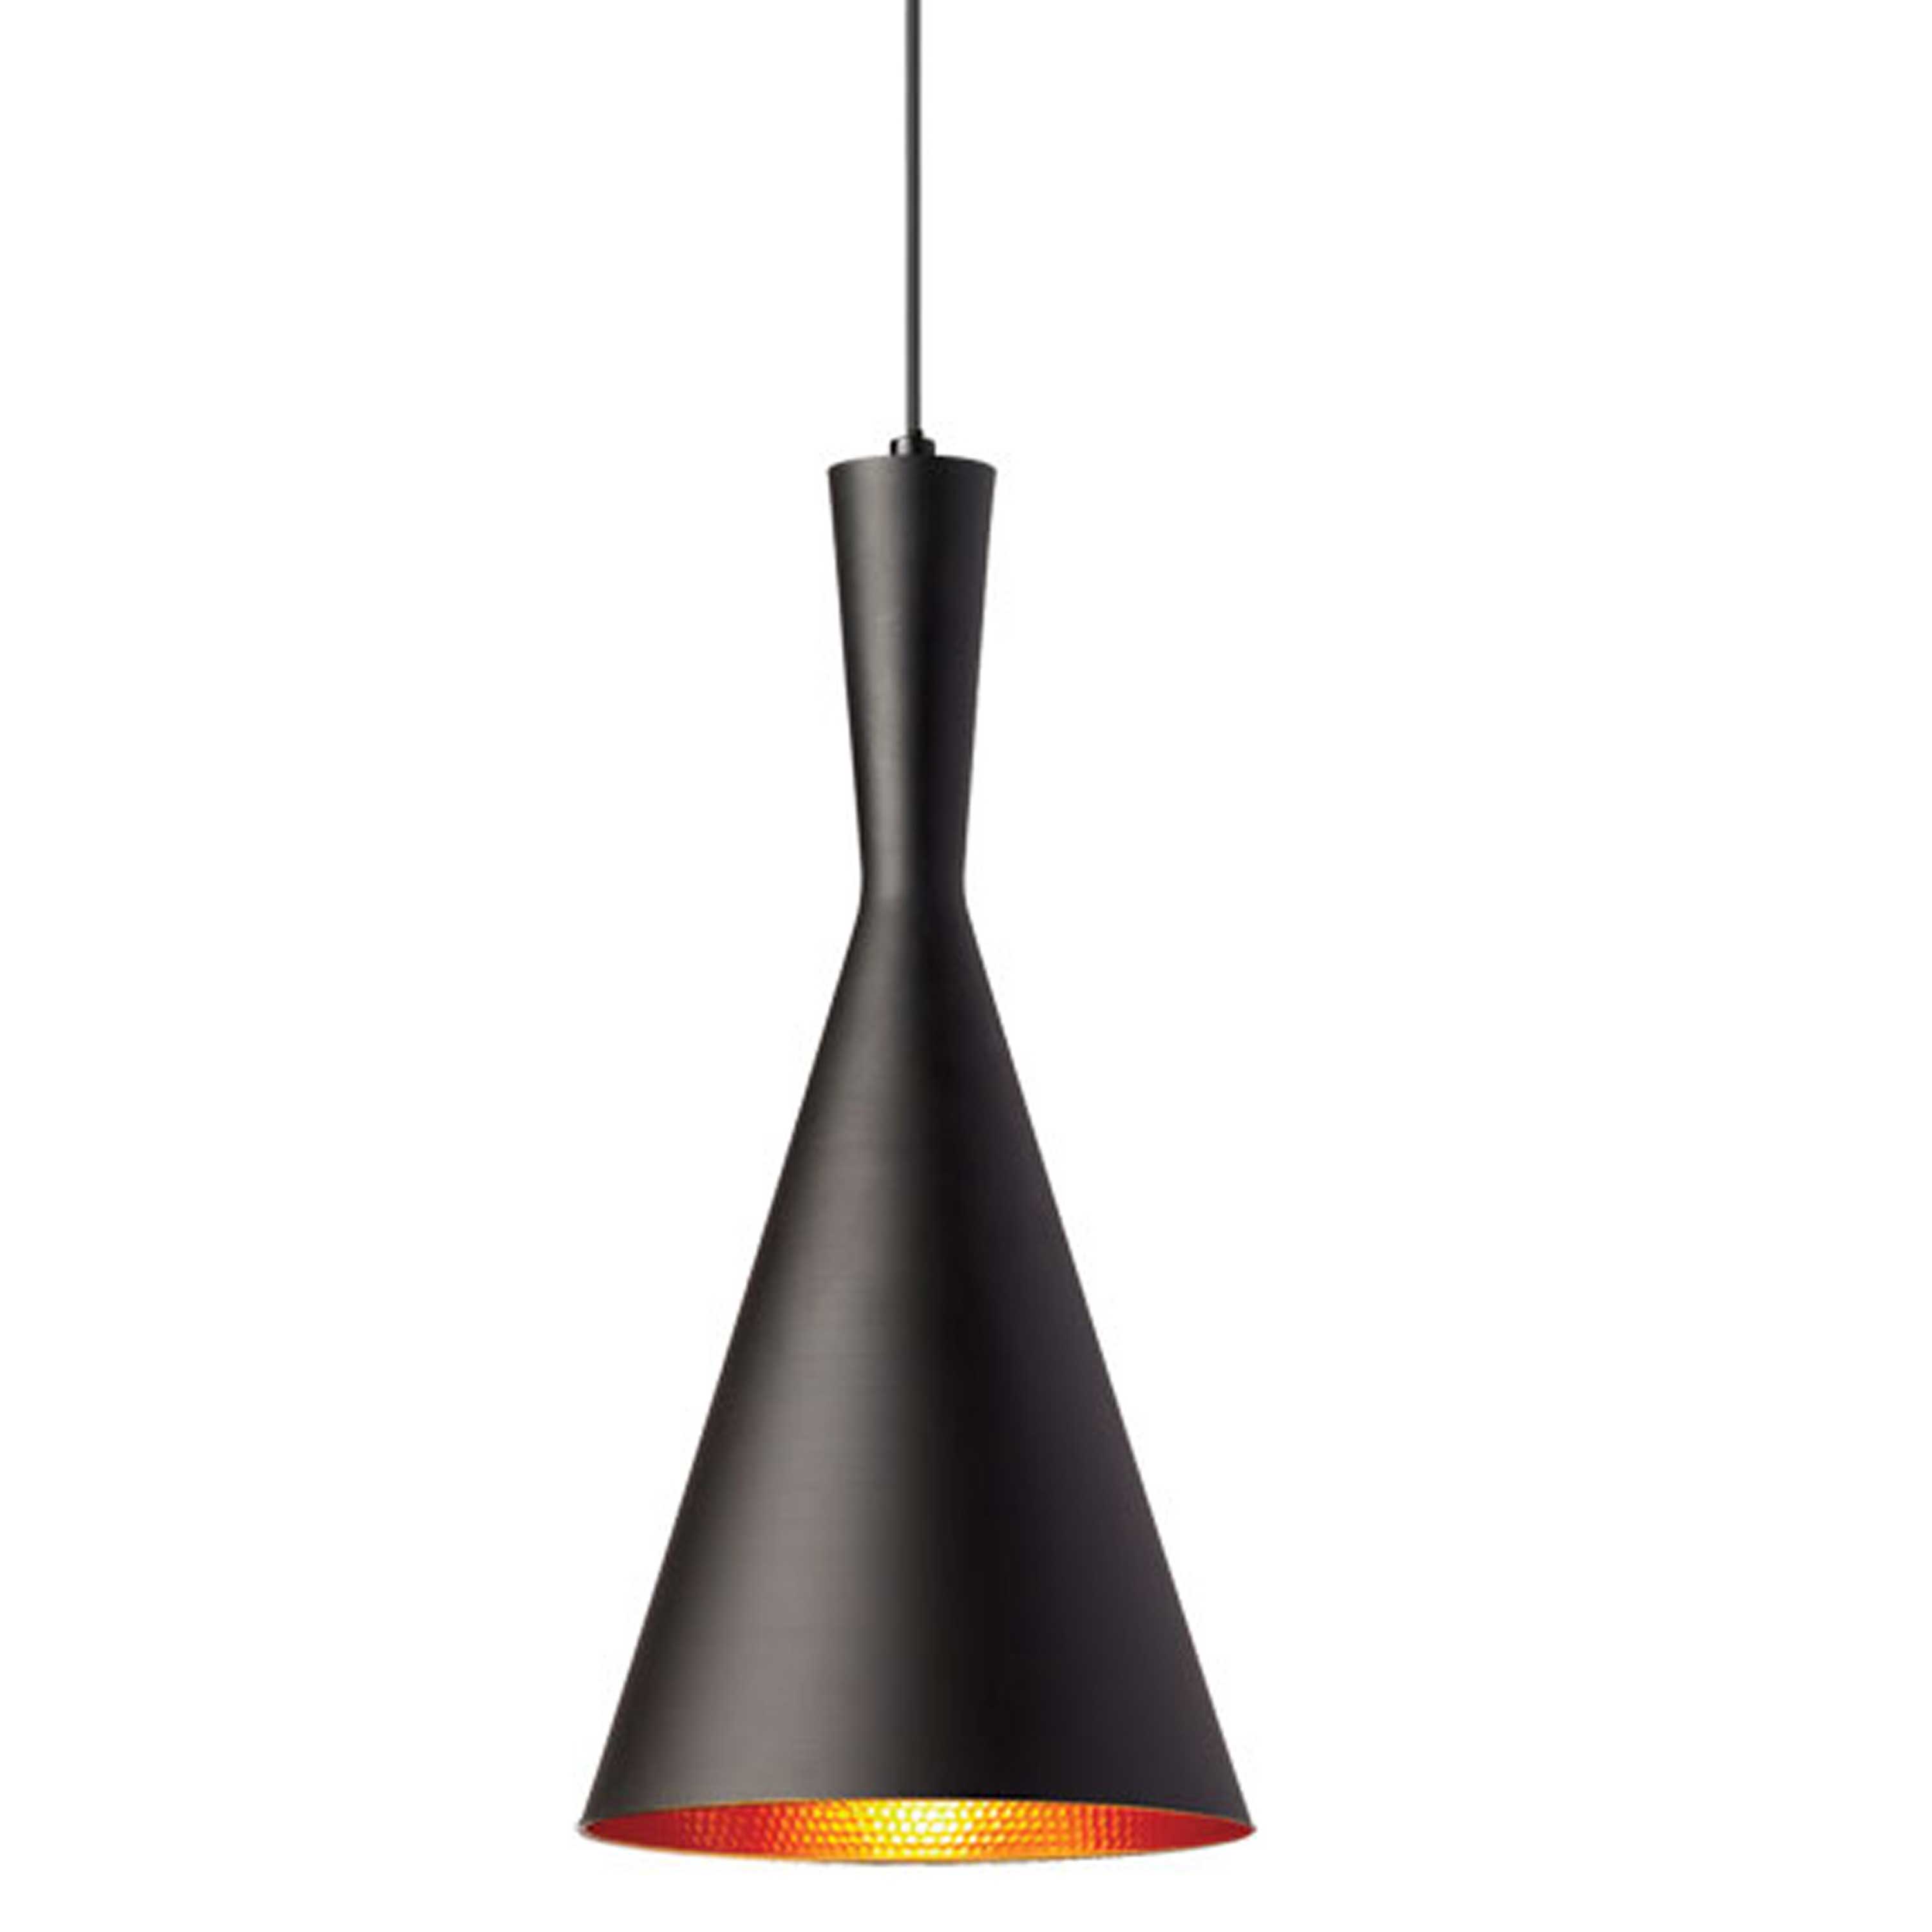 Sleek and stylish, the Helsinki line of lighting fixtures adds a chic fashionable note to your home décor.  Helsinki pendant lighting features a solid, opaque shade and canopy in a variety of shapes with gracefully curved lines. The shade comes in your choice of matte black with a gold finish interior or matte white with a silver finish inside to give you warm lighting in skin flattering shades that will complement most colour palettes, including contemporary neutrals. Available in single bulb configurations, Helsinki lighting is ideal for hallways or smaller rooms and areas.